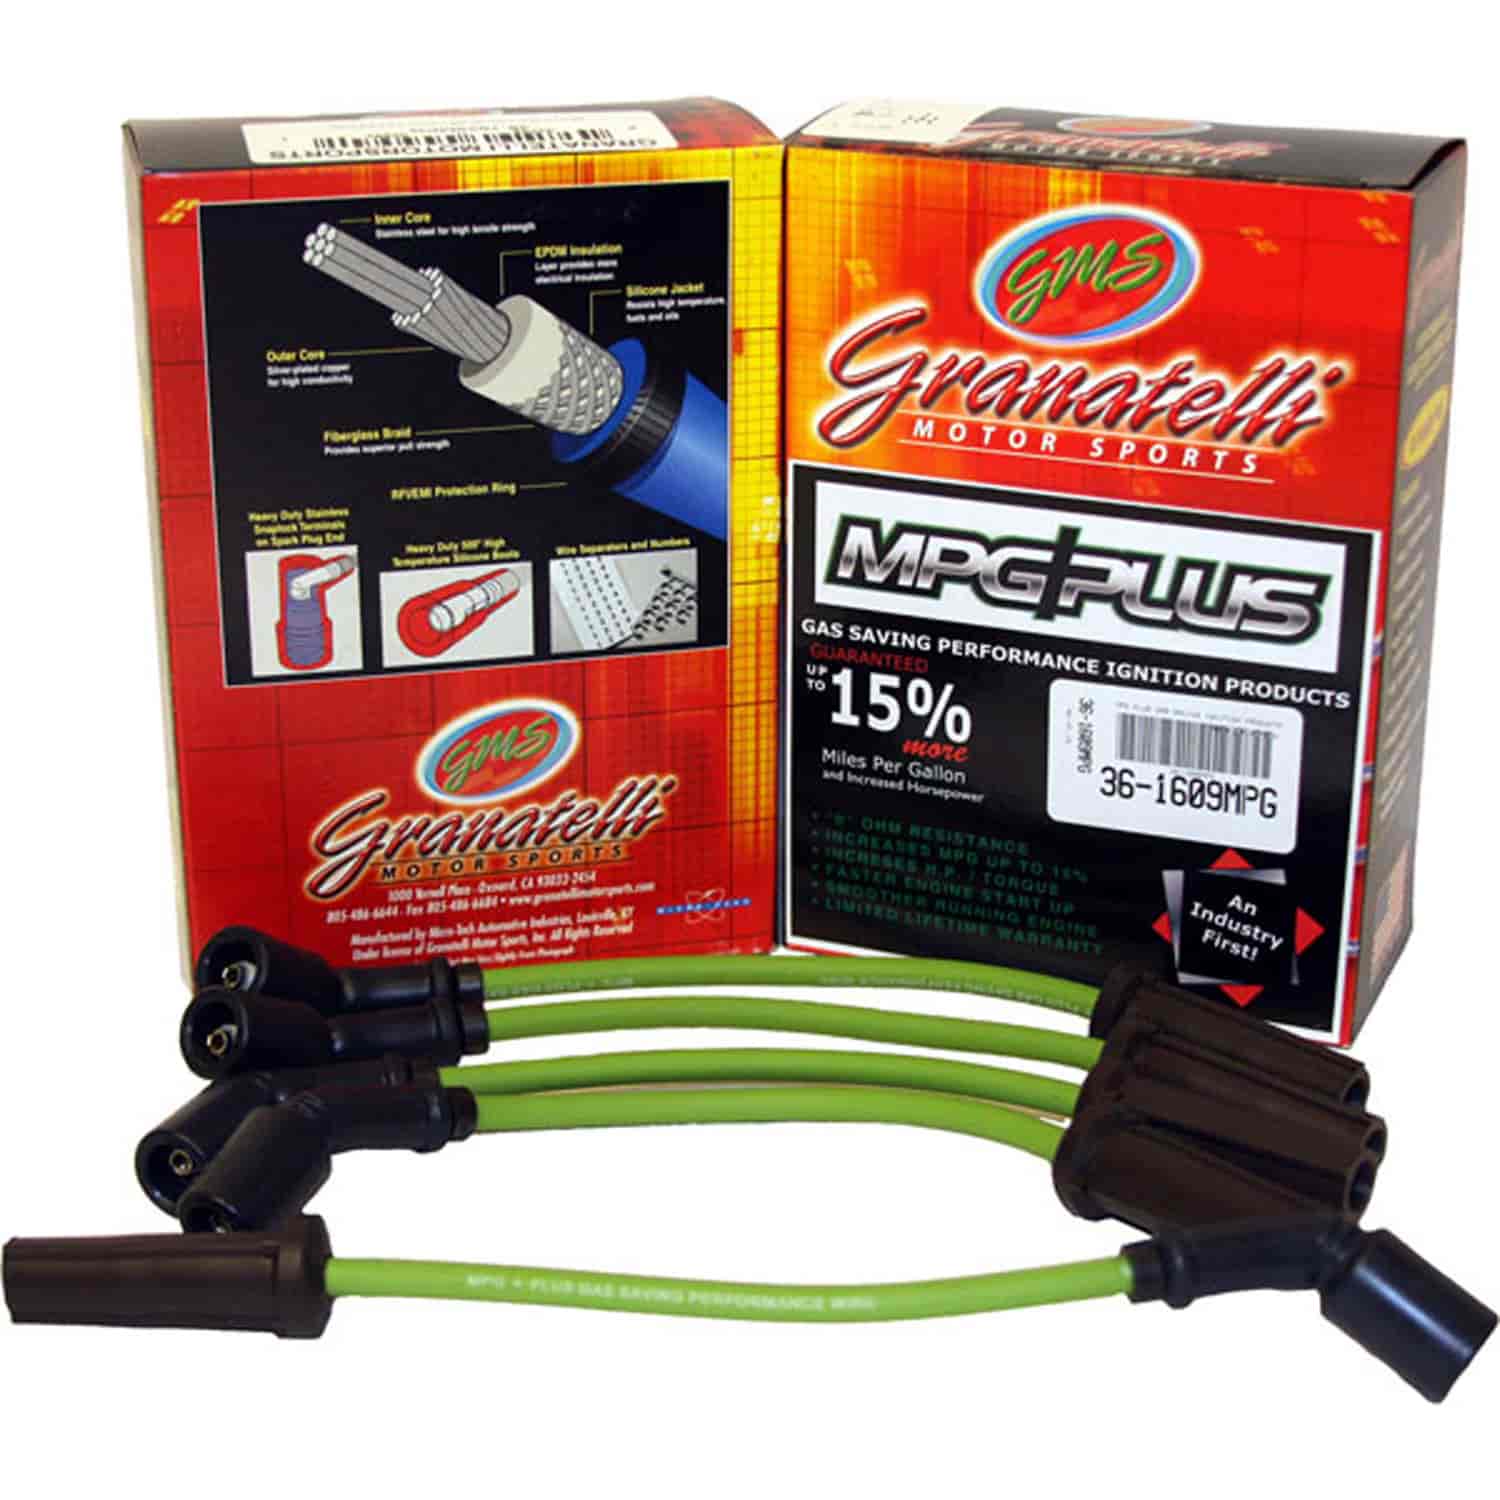 MPG Wires LINCOLN LS SERIES 6CYL 3.0L COIL ON PLUG 00-06